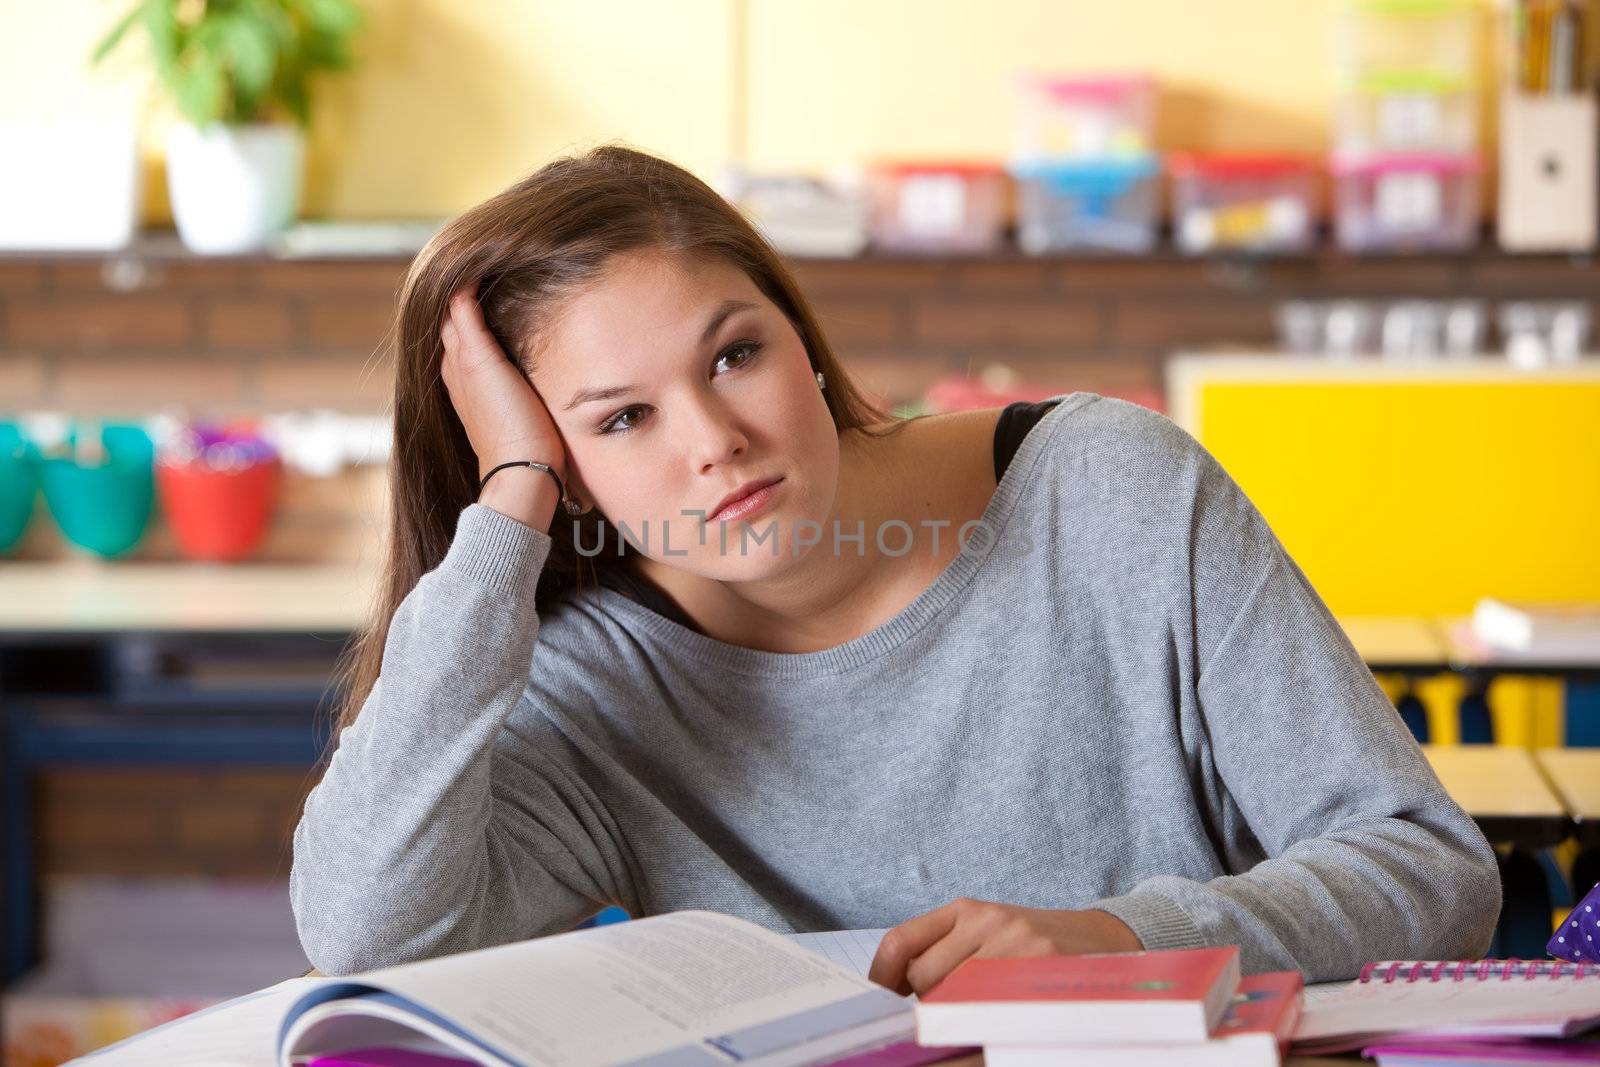 Attractive young teenager dreaming away in the classroom looking bored